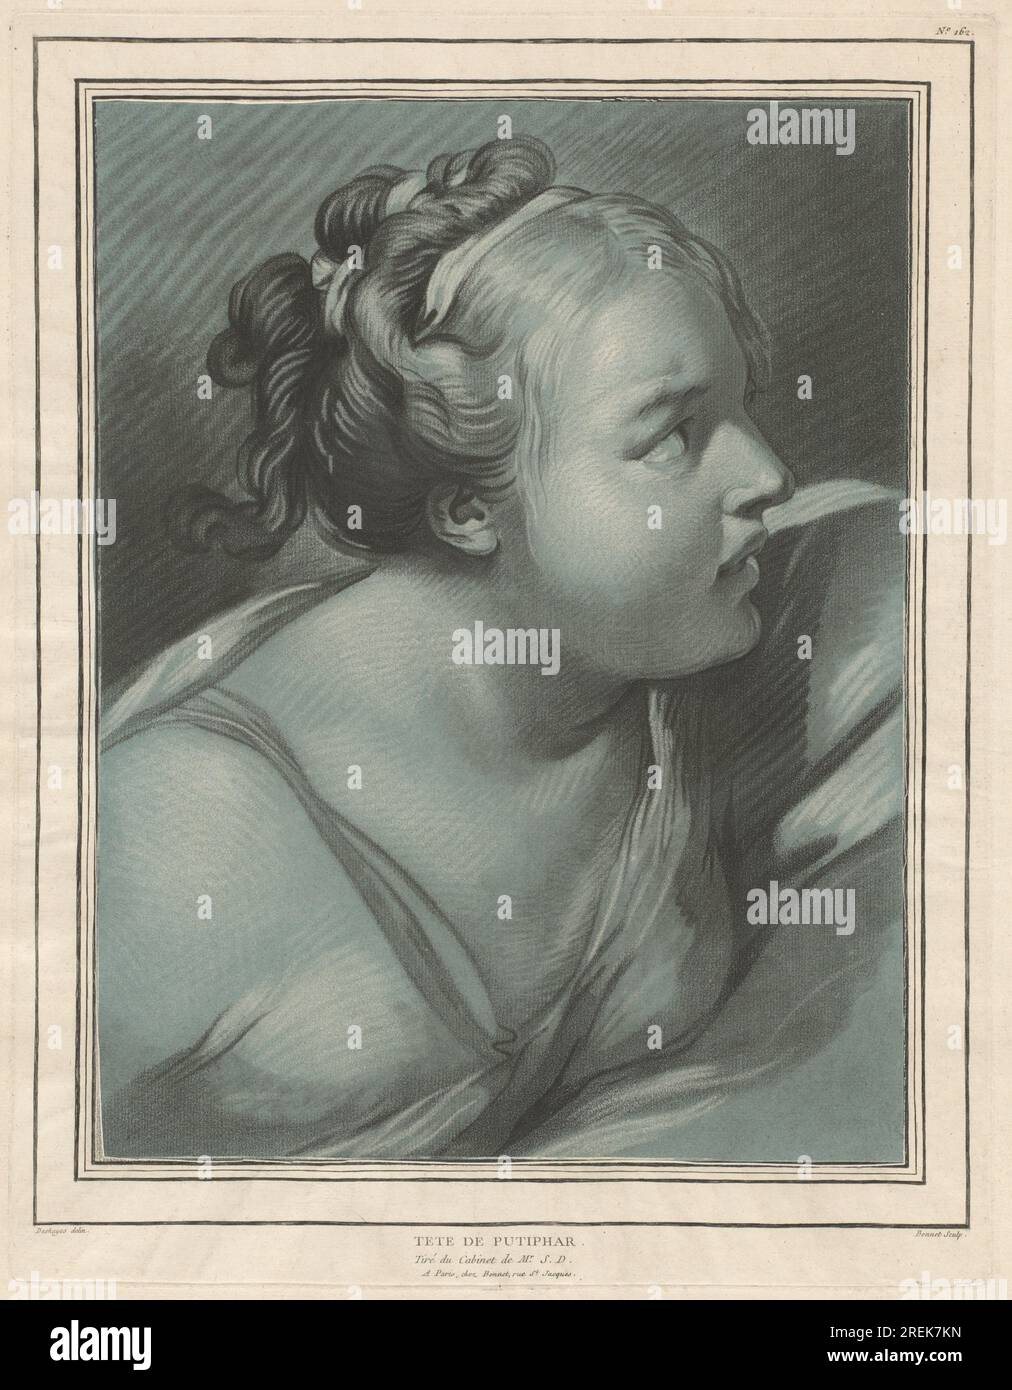 'Louis-Marin Bonnet, after Jean-Baptiste Deshays, Tête de Putiphar (Head of Potiphar's Wife), 1773, chalk manner printed from two plates in black and white on blue laid paper, plate: 50.9 × 39.2 cm (20 1/16 × 15 7/16 in.) sheet: 57.3 × 43.9 cm (22 9/16 × 17 5/16 in.), Purchase as the Gift of Ivan and Winifred Phillips in Honor of Margaret Morgan Grasselli, 2017.6.2' Stock Photo